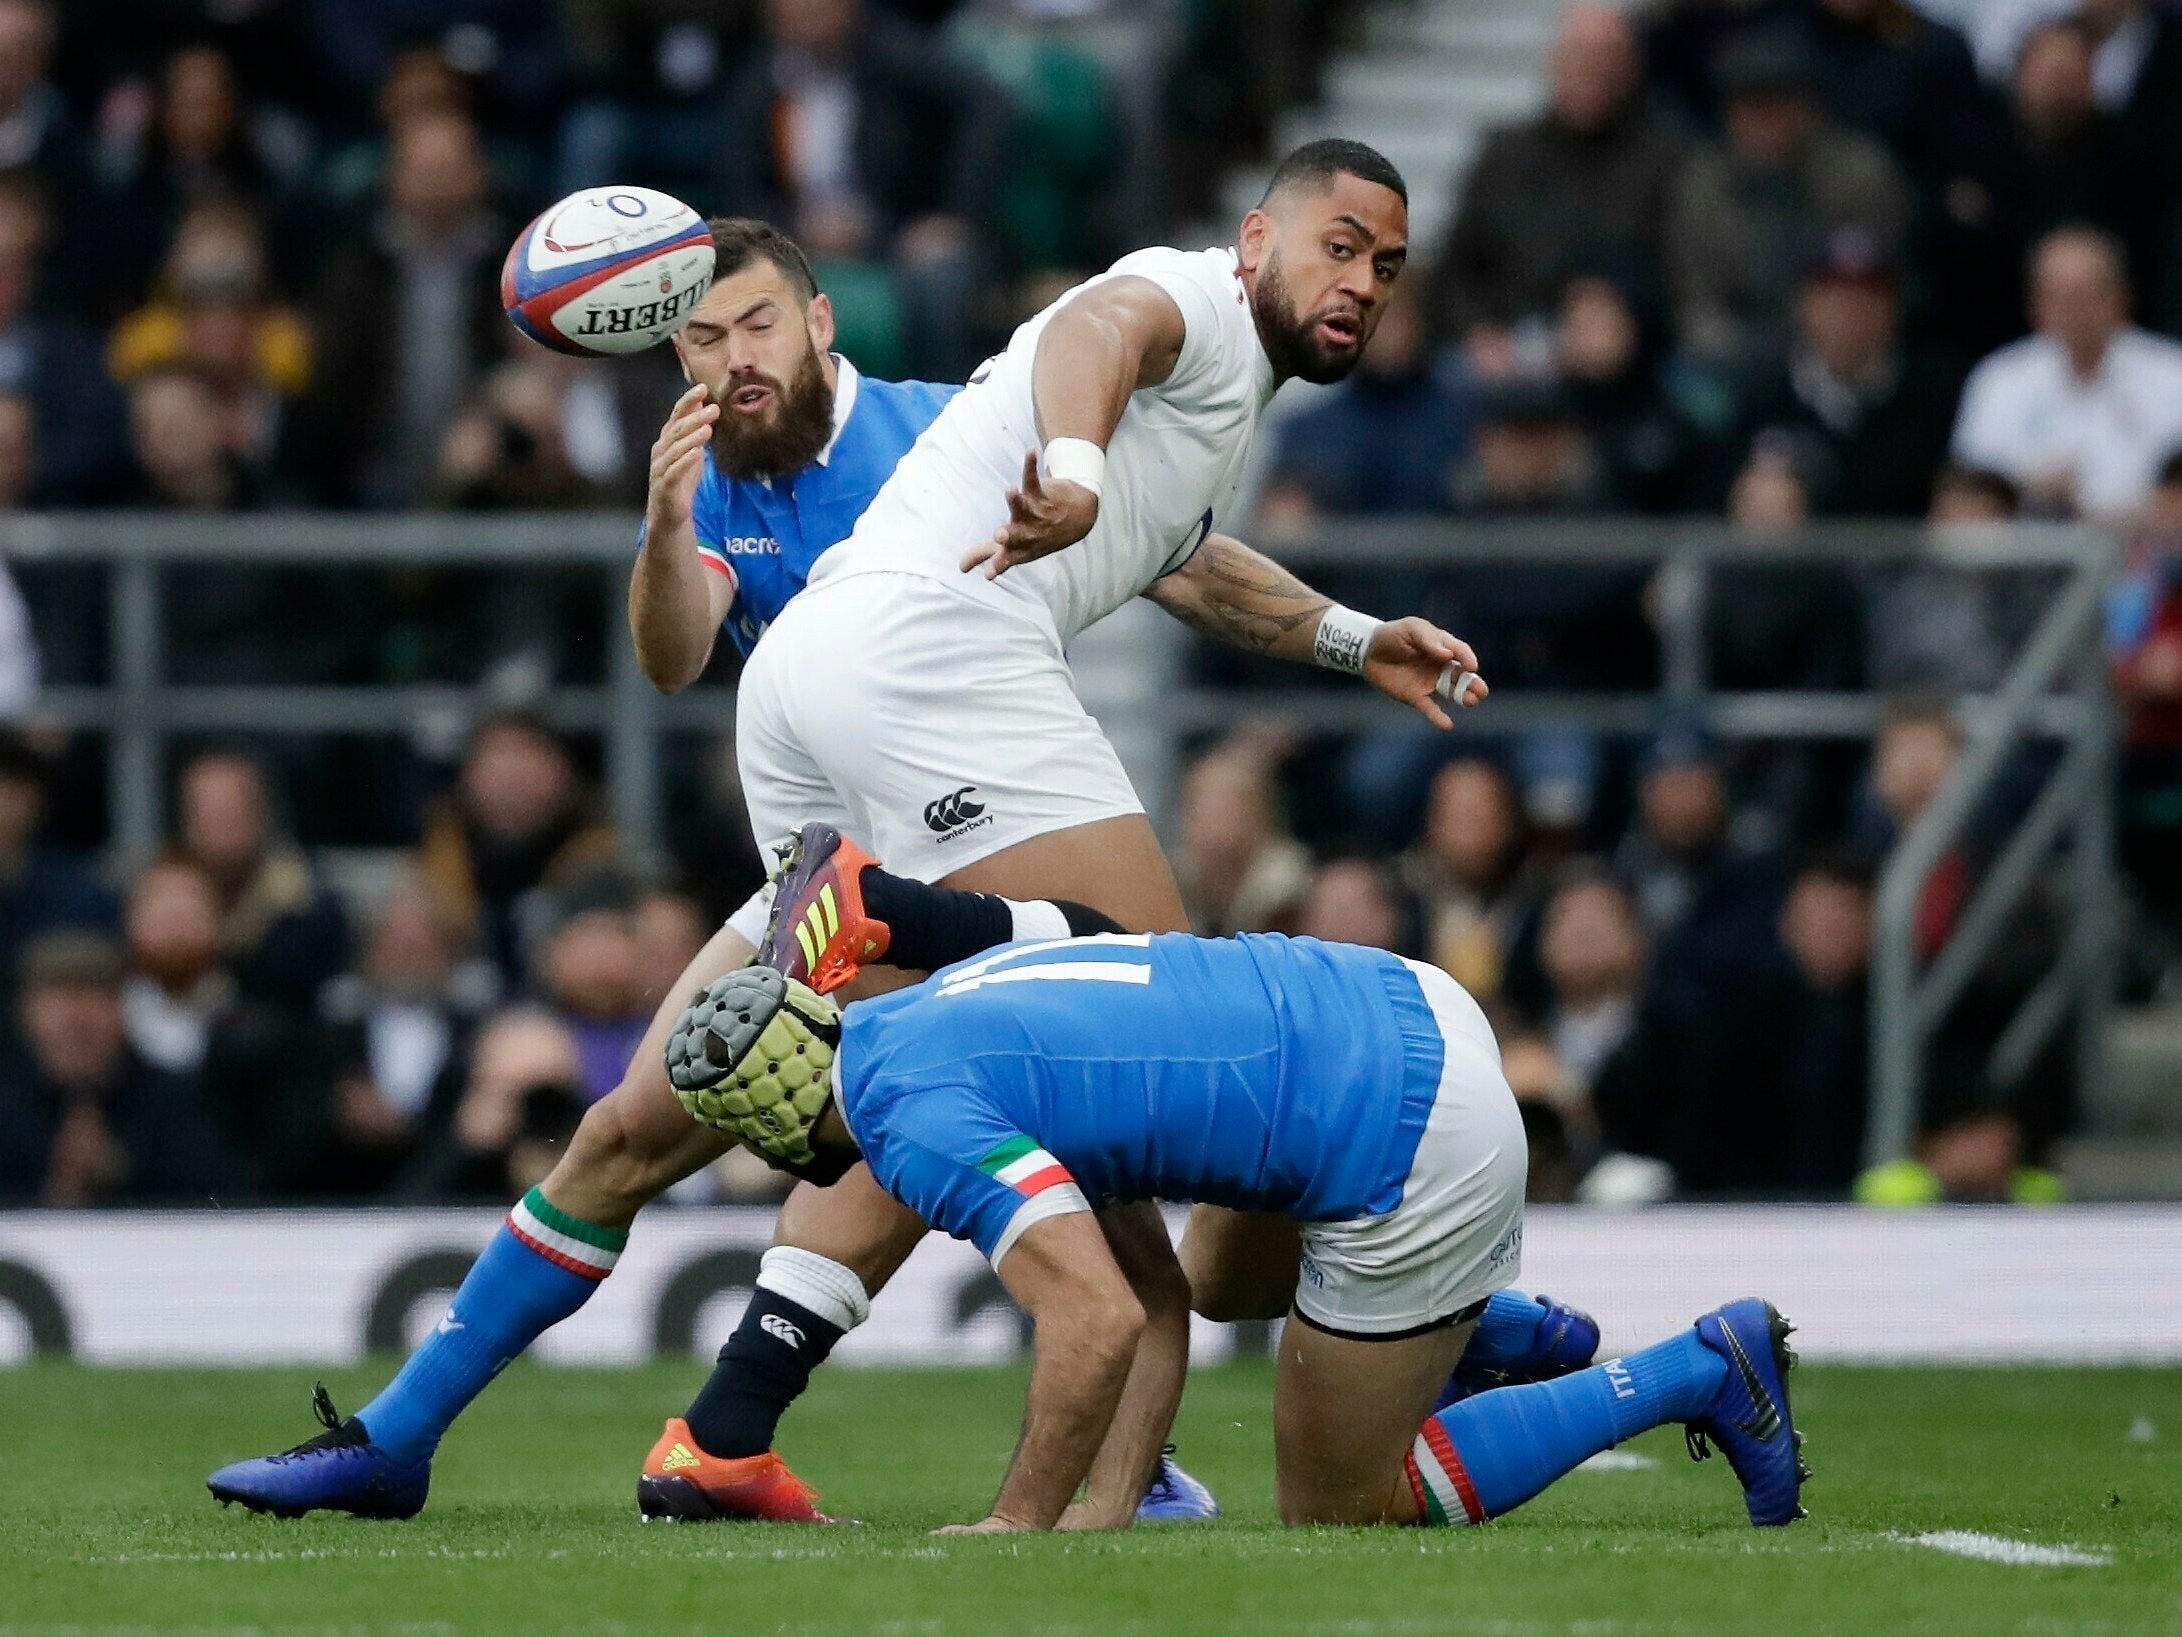 England vs Italy LIVE: 2019 Six Nations latest score, stream and updates from Twickenham - The ...